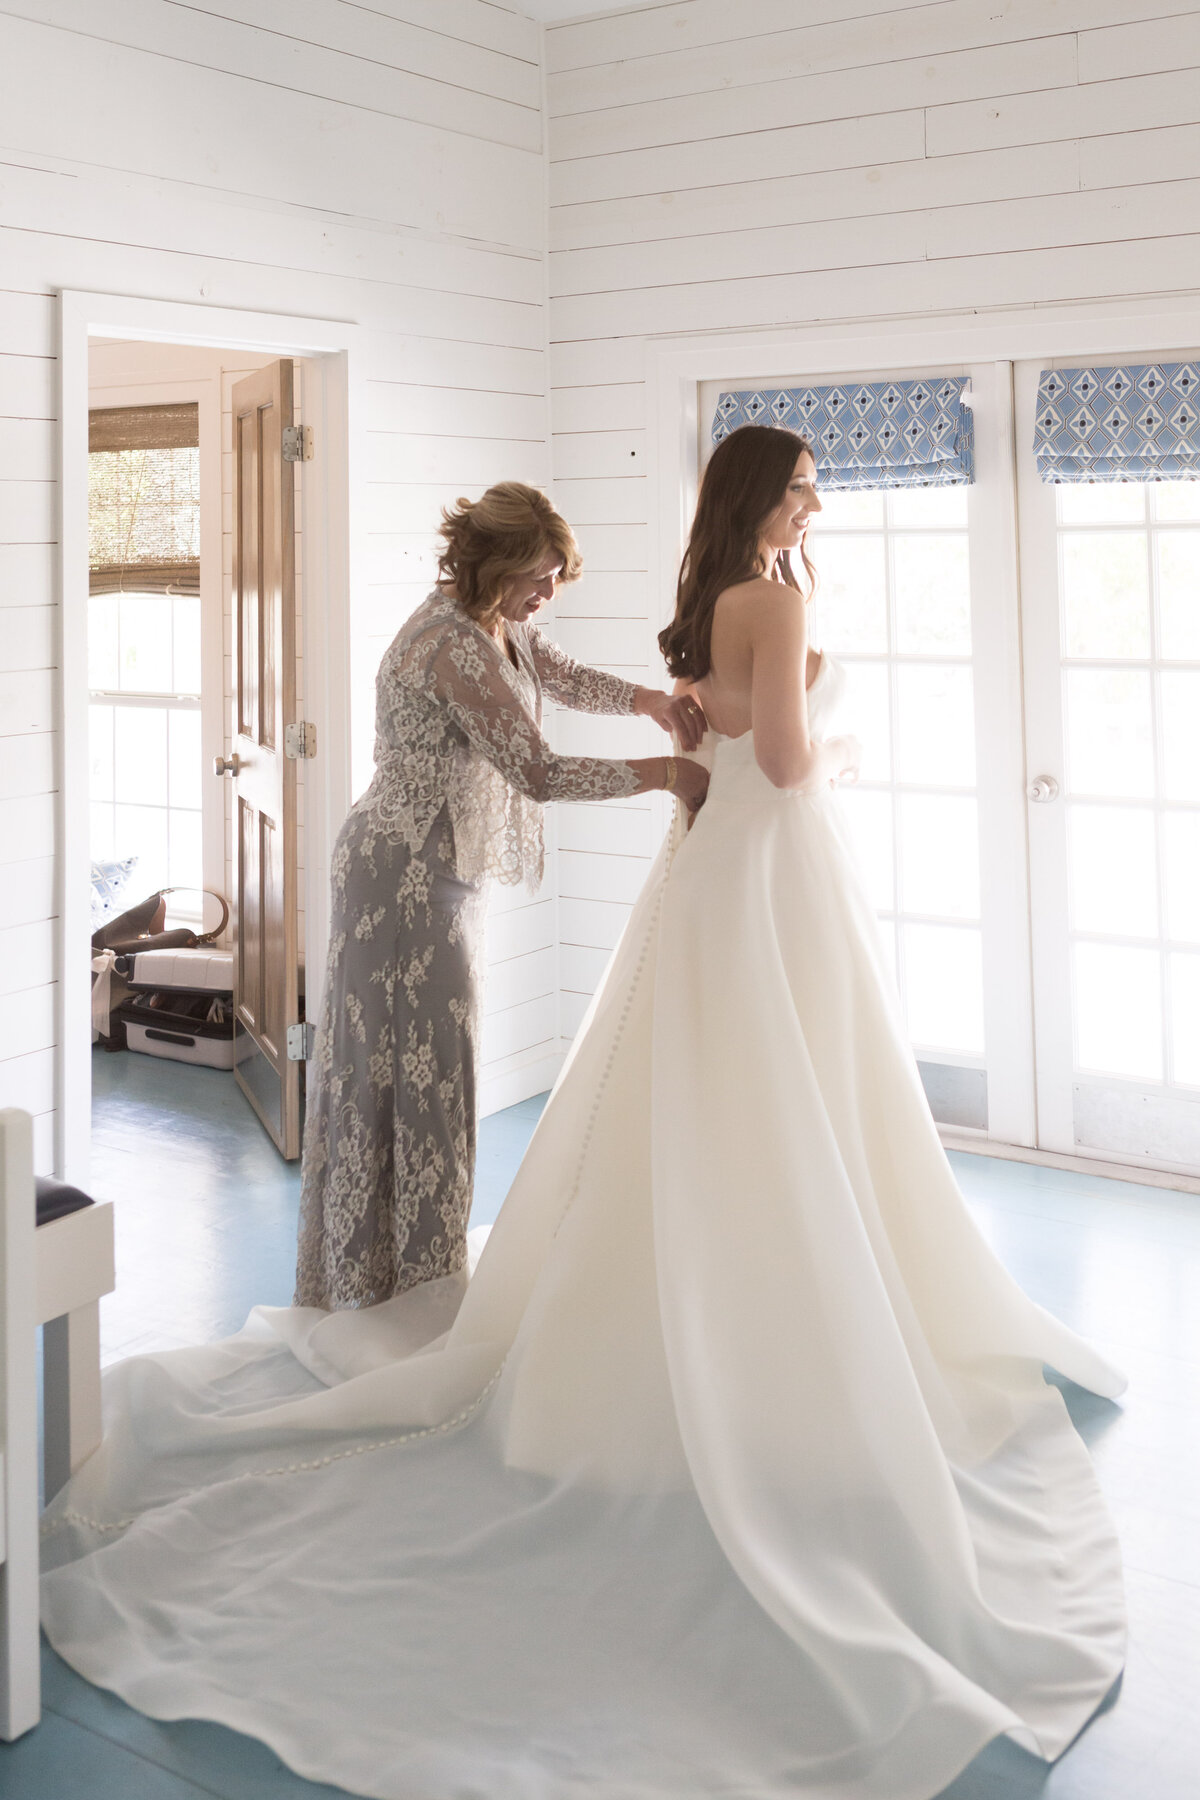 The bride and her mom have an intimate moment as they prepare for her wedding day.